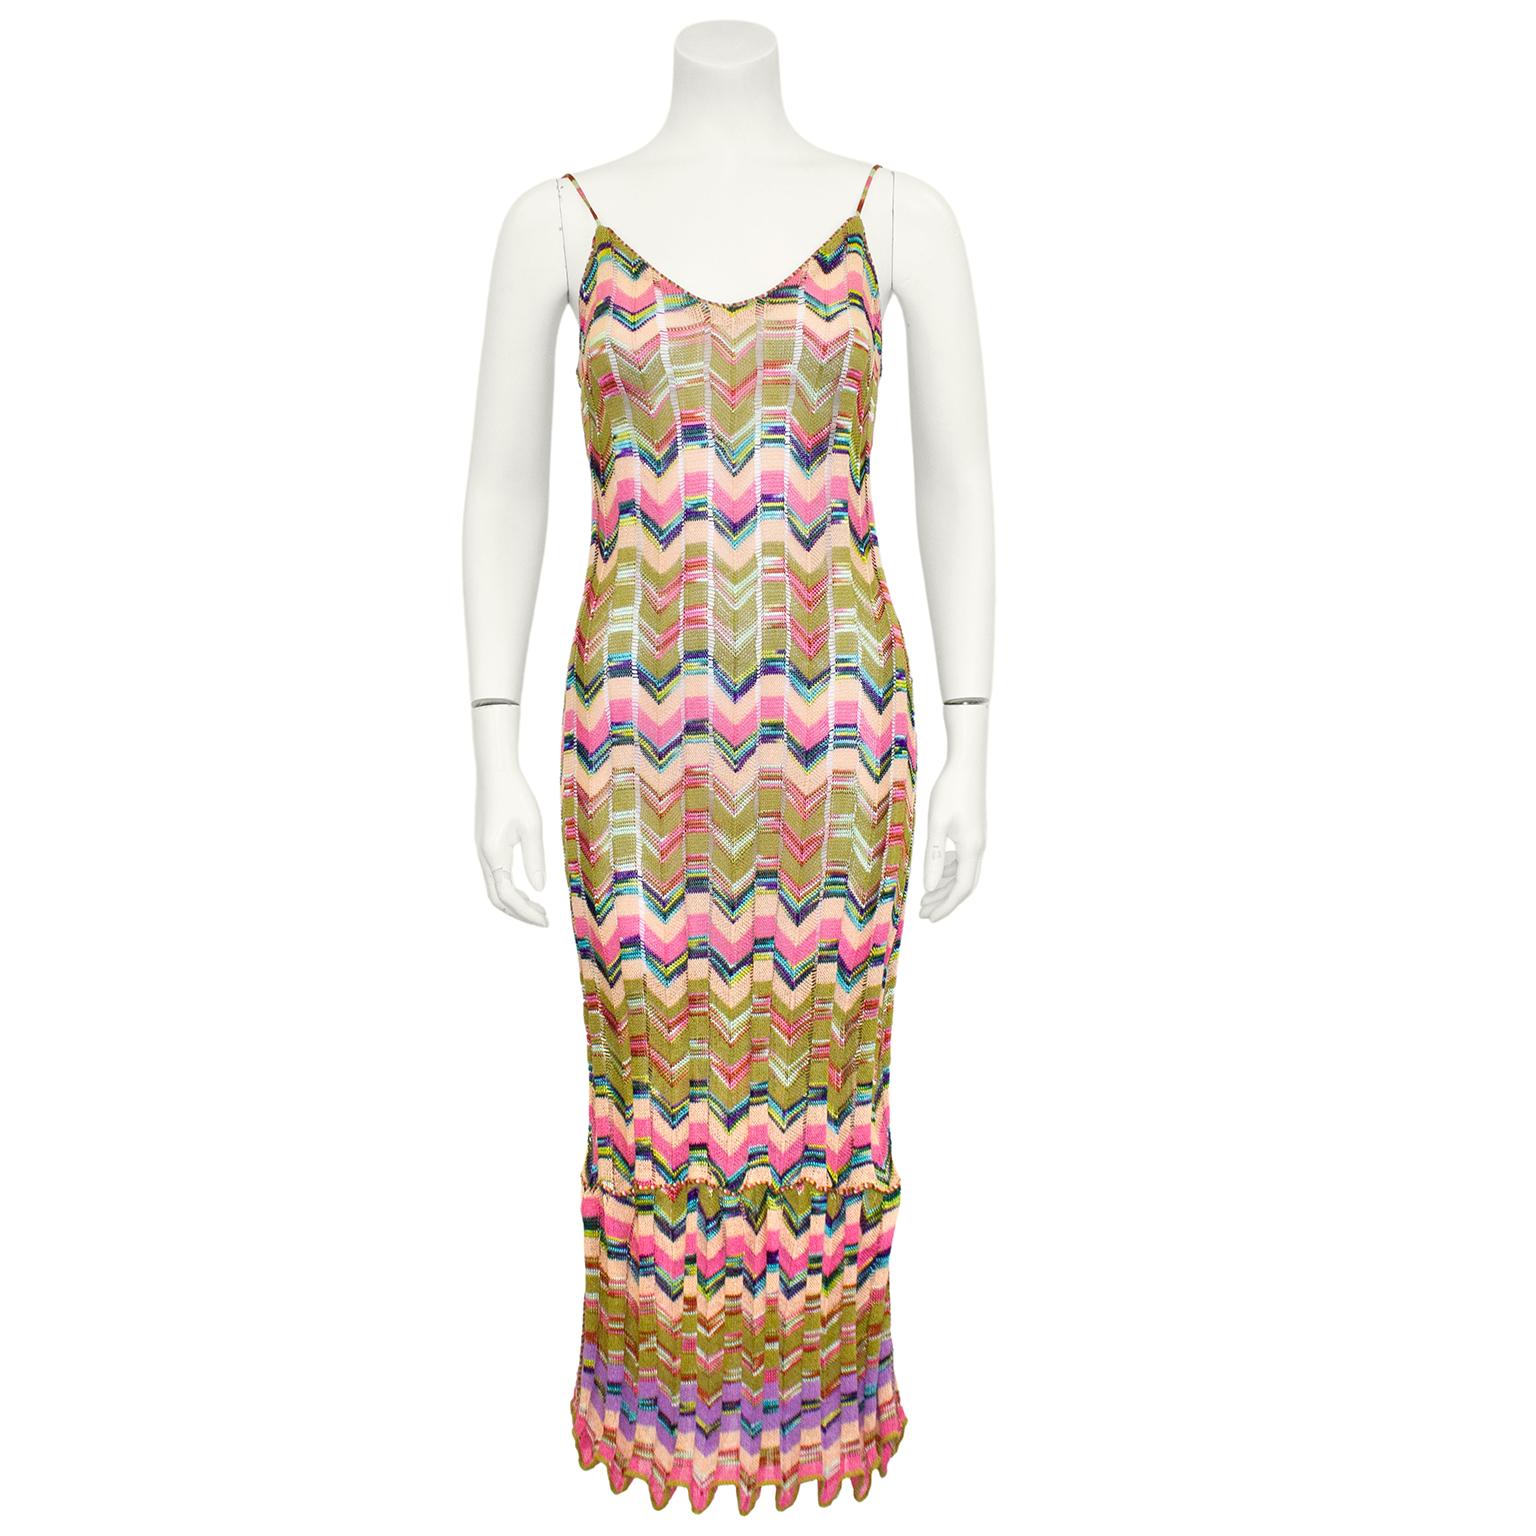 Beautiful Missoni ensemble from the 1990s. The classic and iconic Missoni knit chevron in olive green, pink, peach, green, blue and purple. Midi dress is spaghetti strap with a deep scoop neckline. Ensemble is completed with matching long sleeve mid